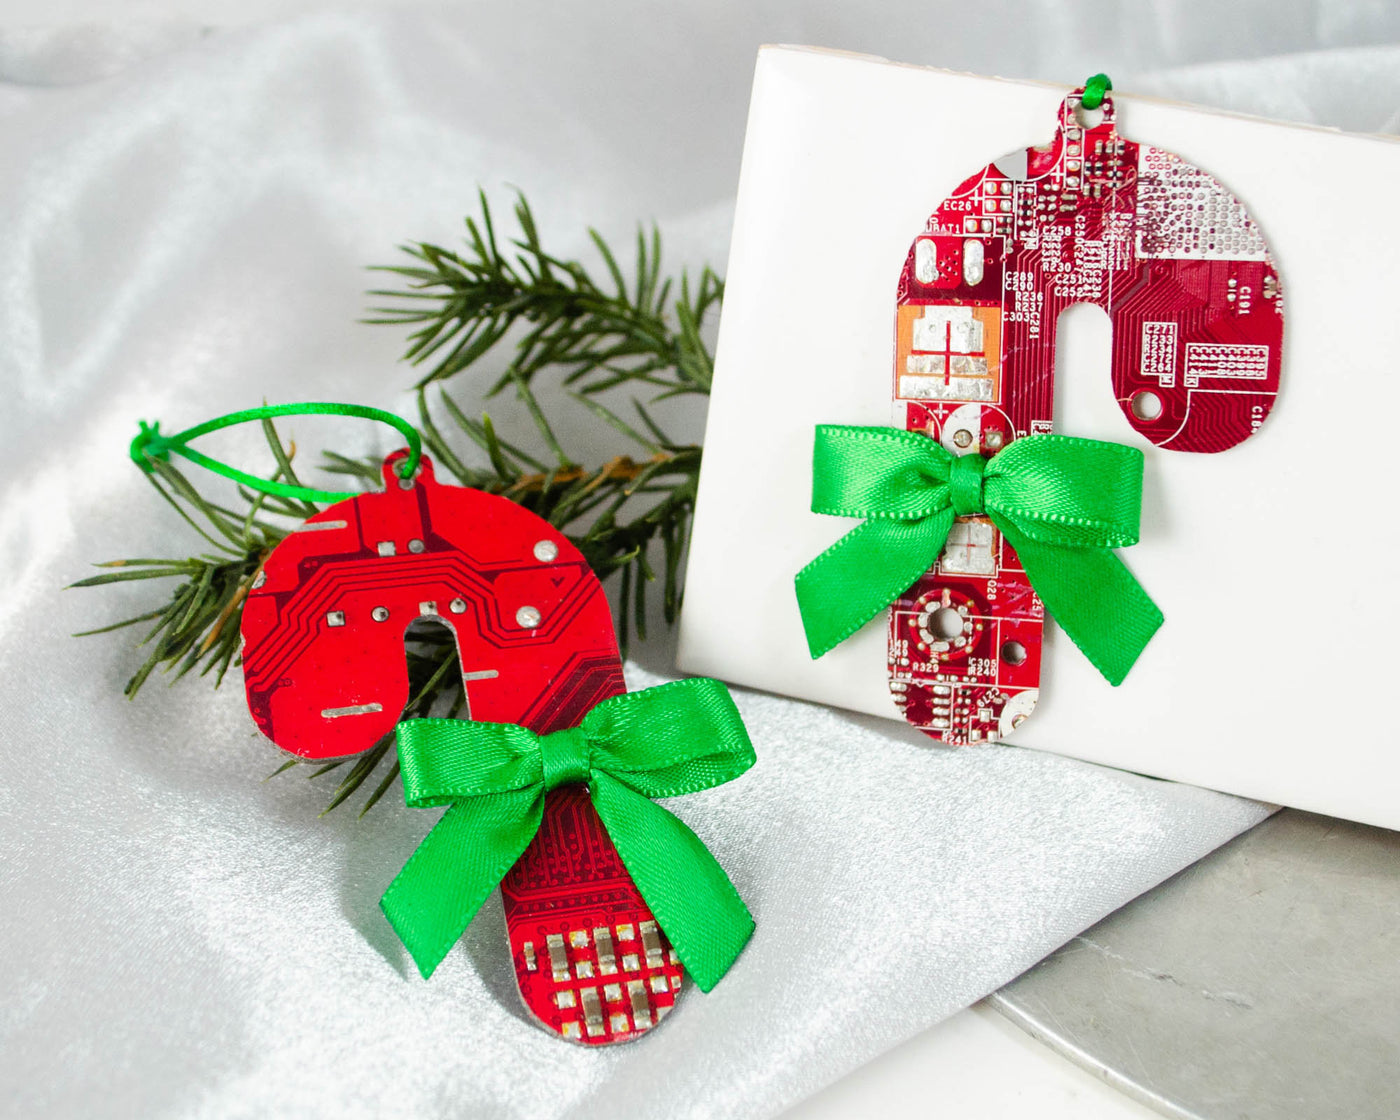 Circuit Board Candy Cane Ornament with Bow